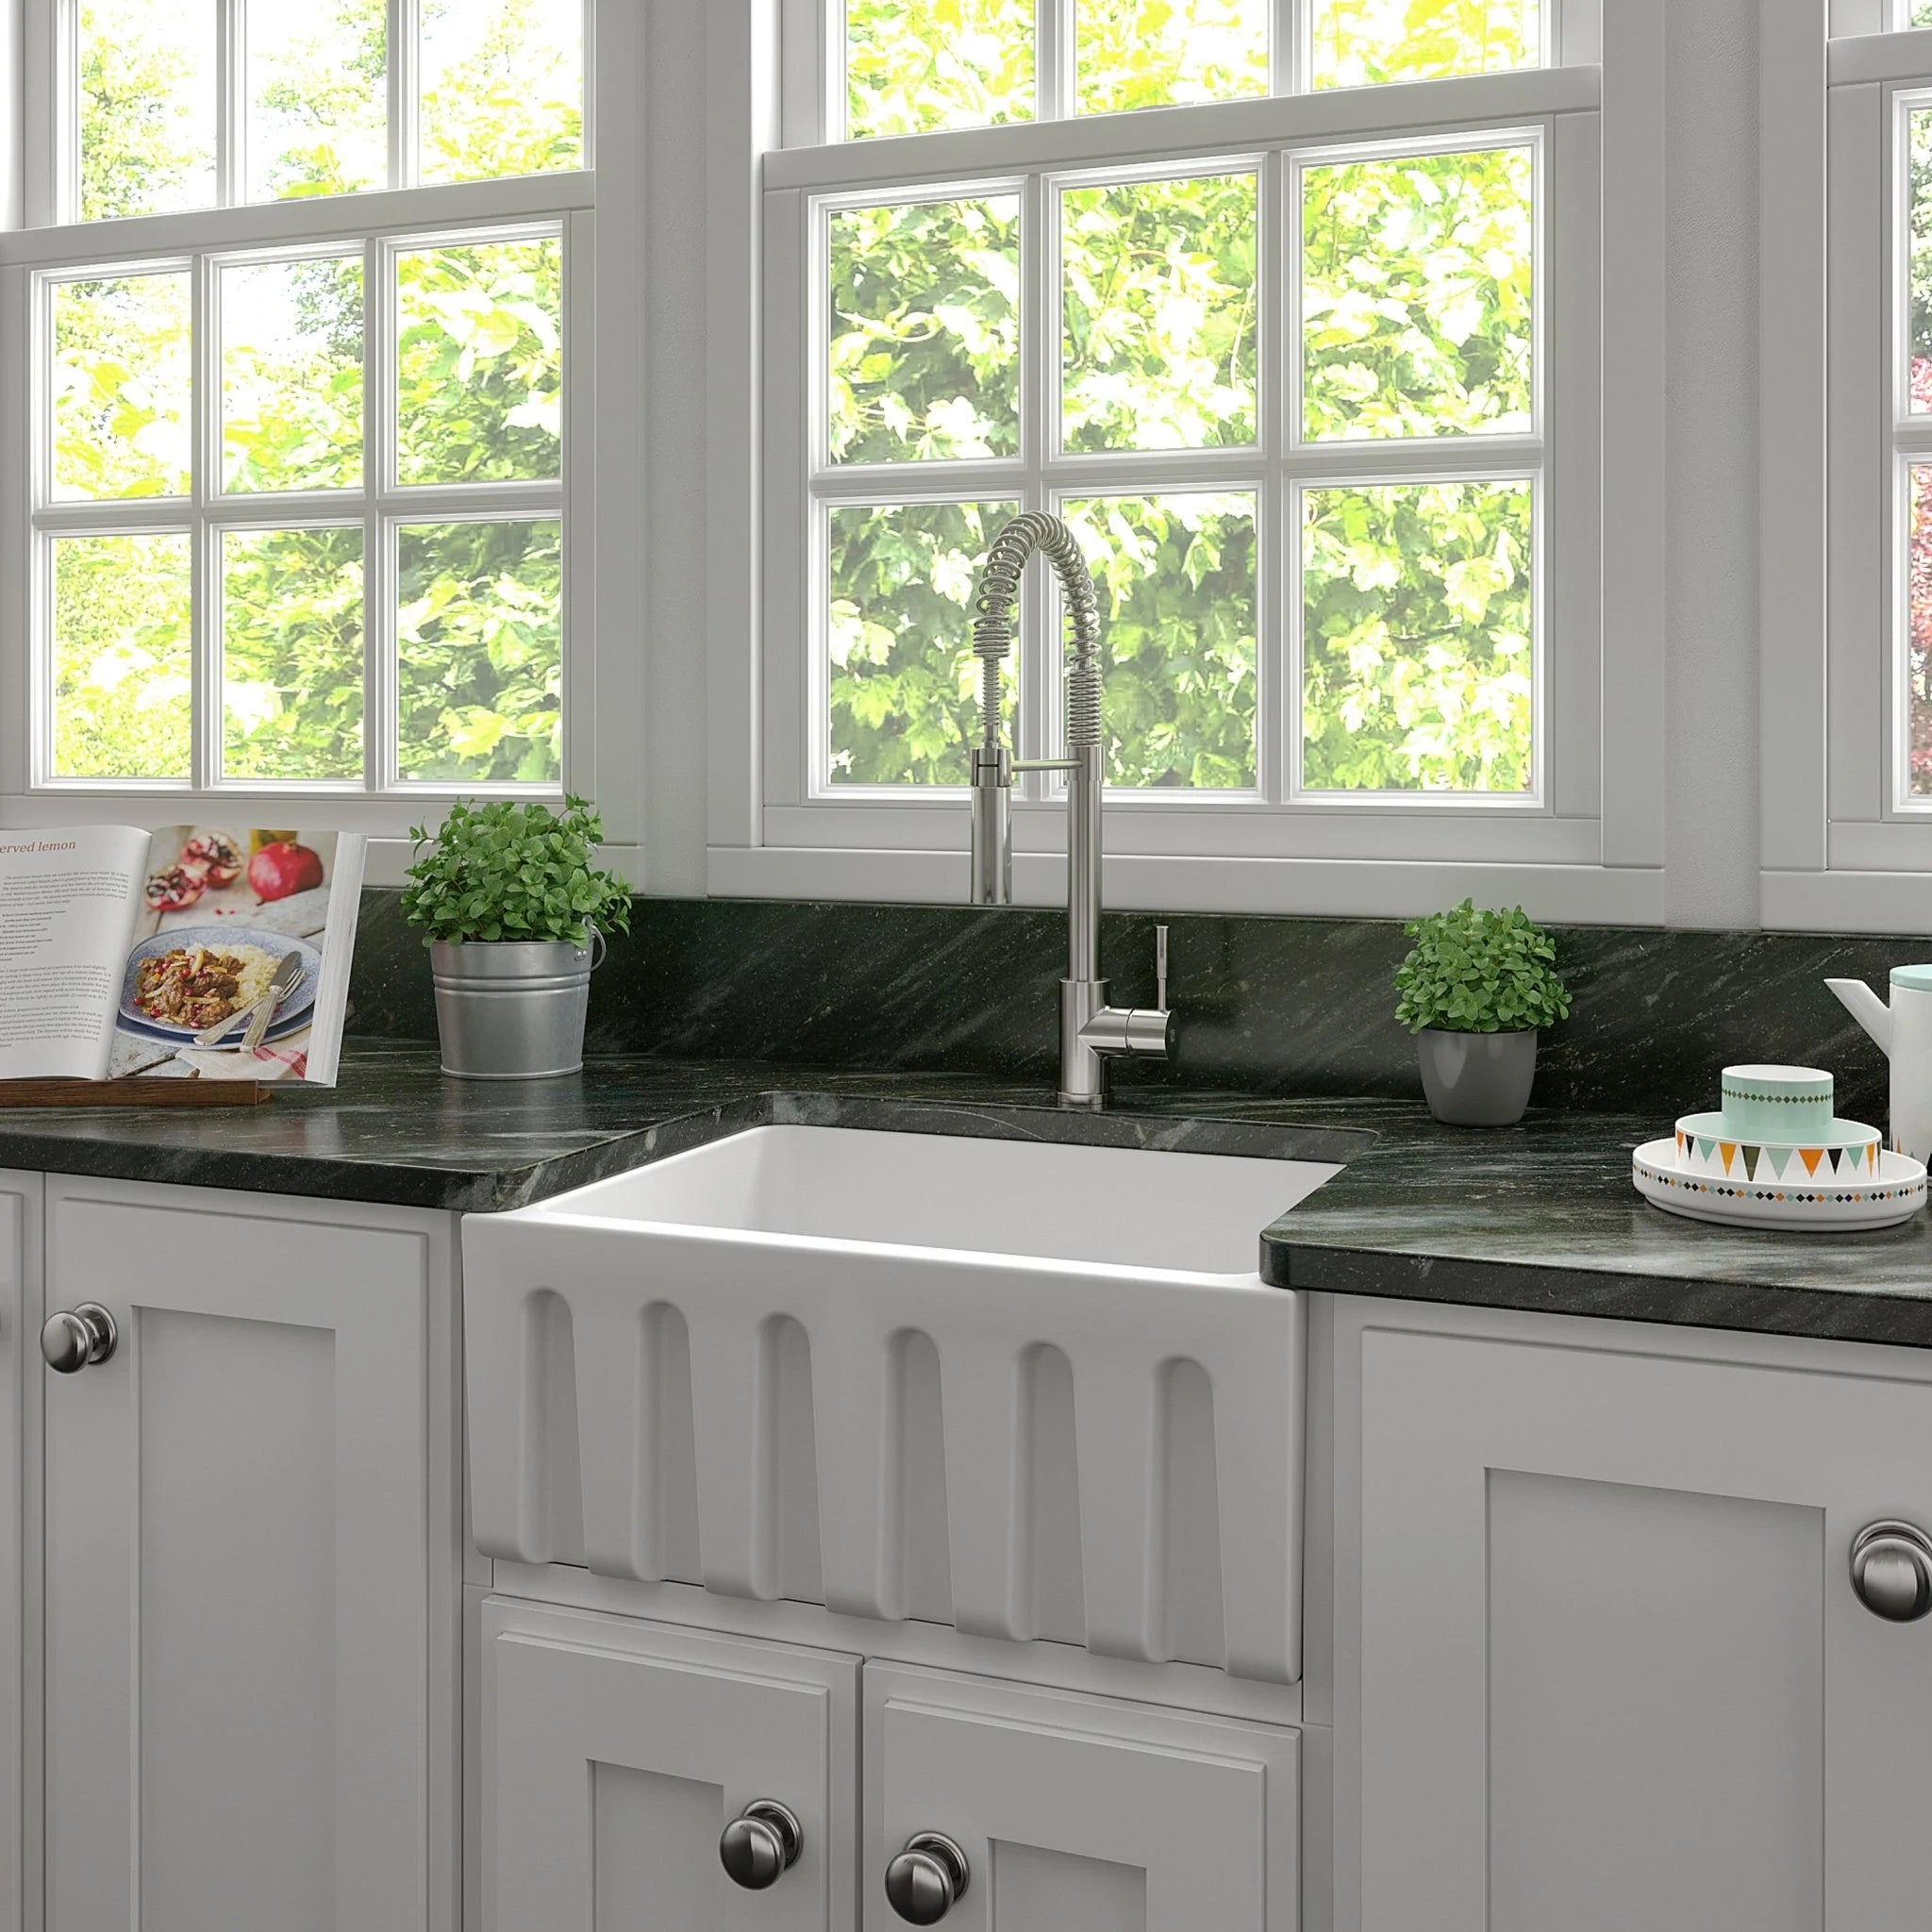 Buy Reversible Apron Front Fireclay Kitchen Sink